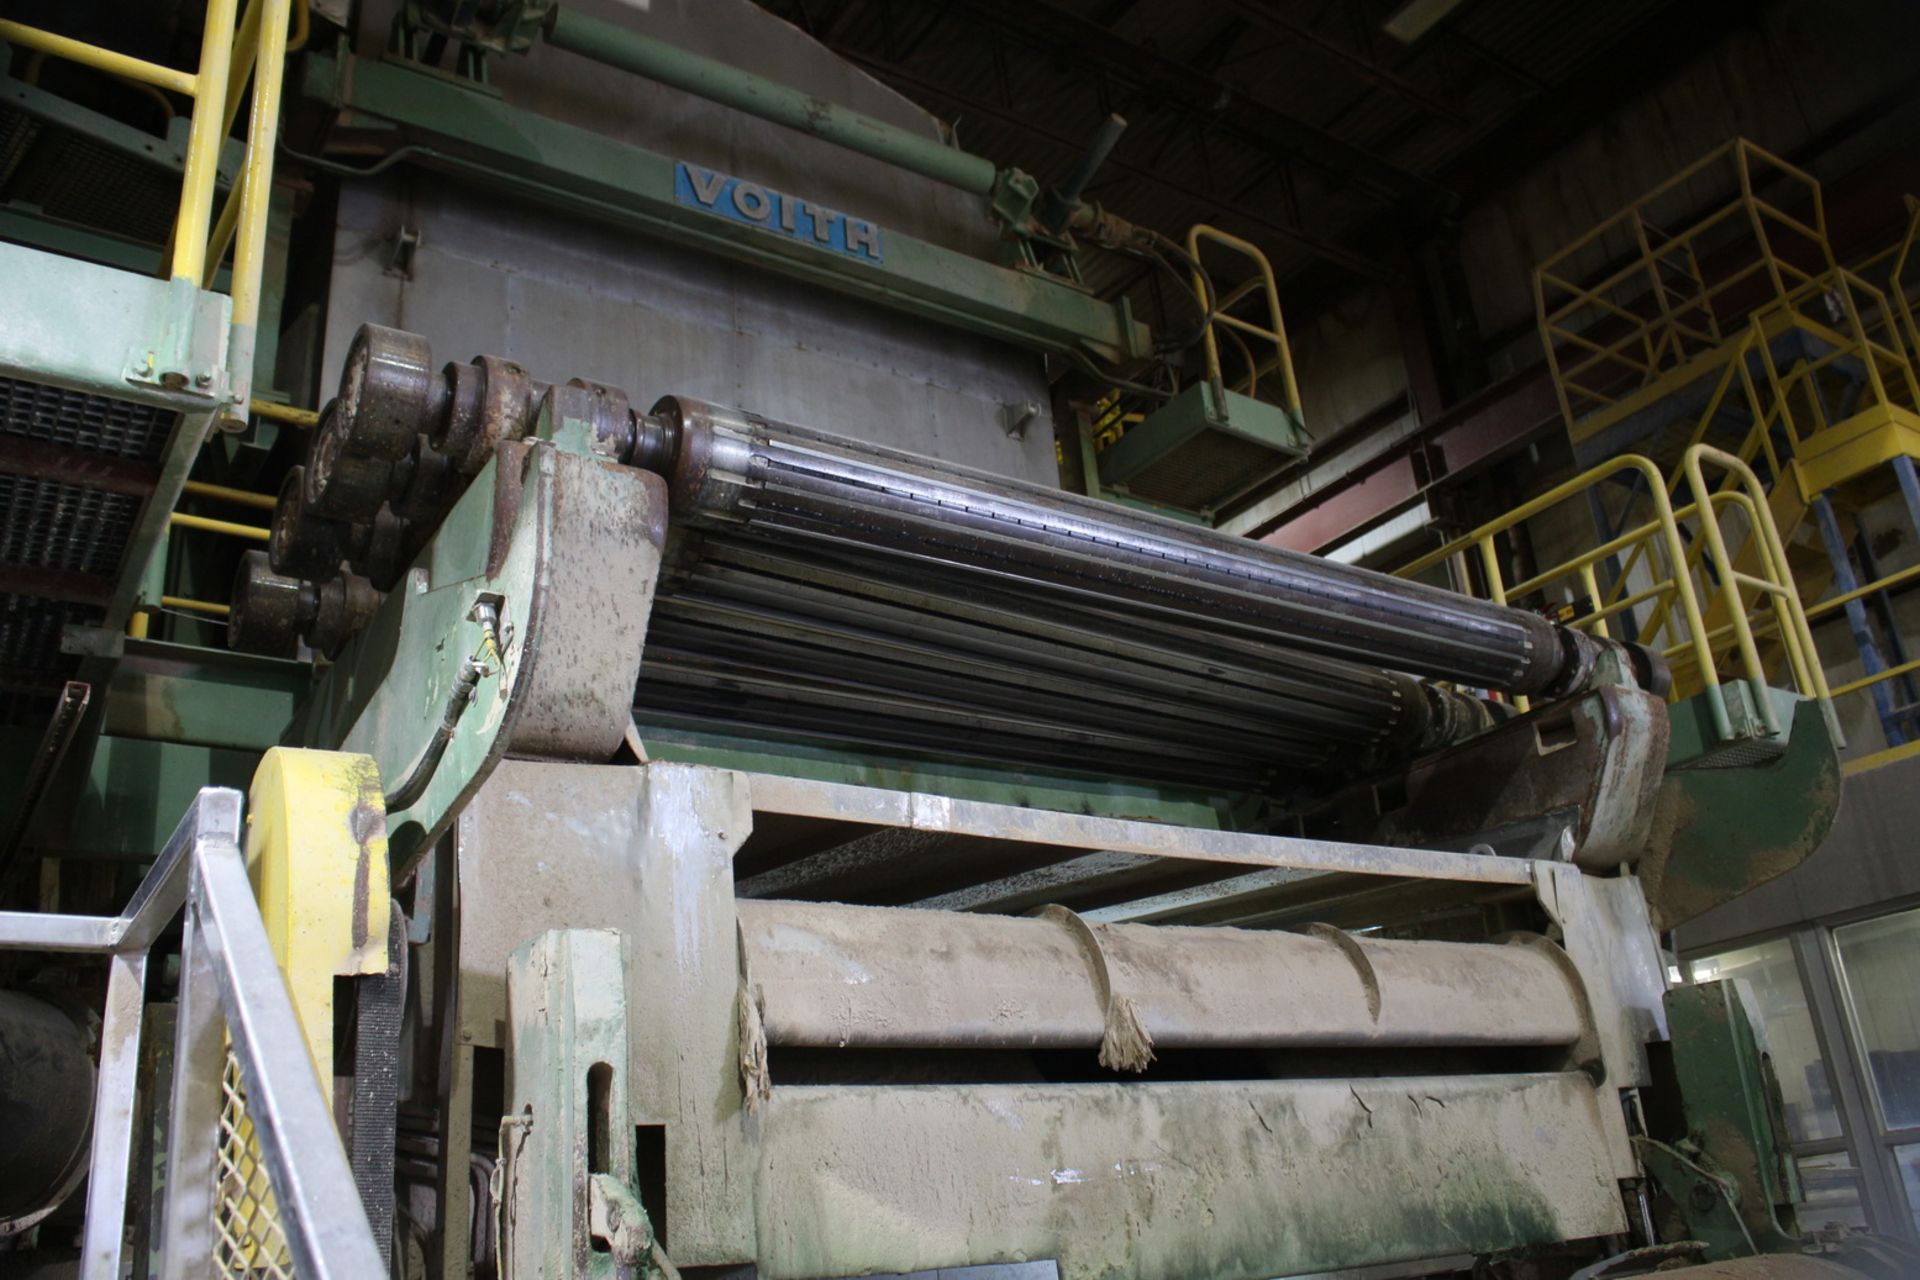 VOITH 104" TRIM YANKEE TISSUE MILL - NOTE: TO BE SOLD BY PRIVATE TREATY, CONTACT AUCTIONEER DIRECT - Image 255 of 273